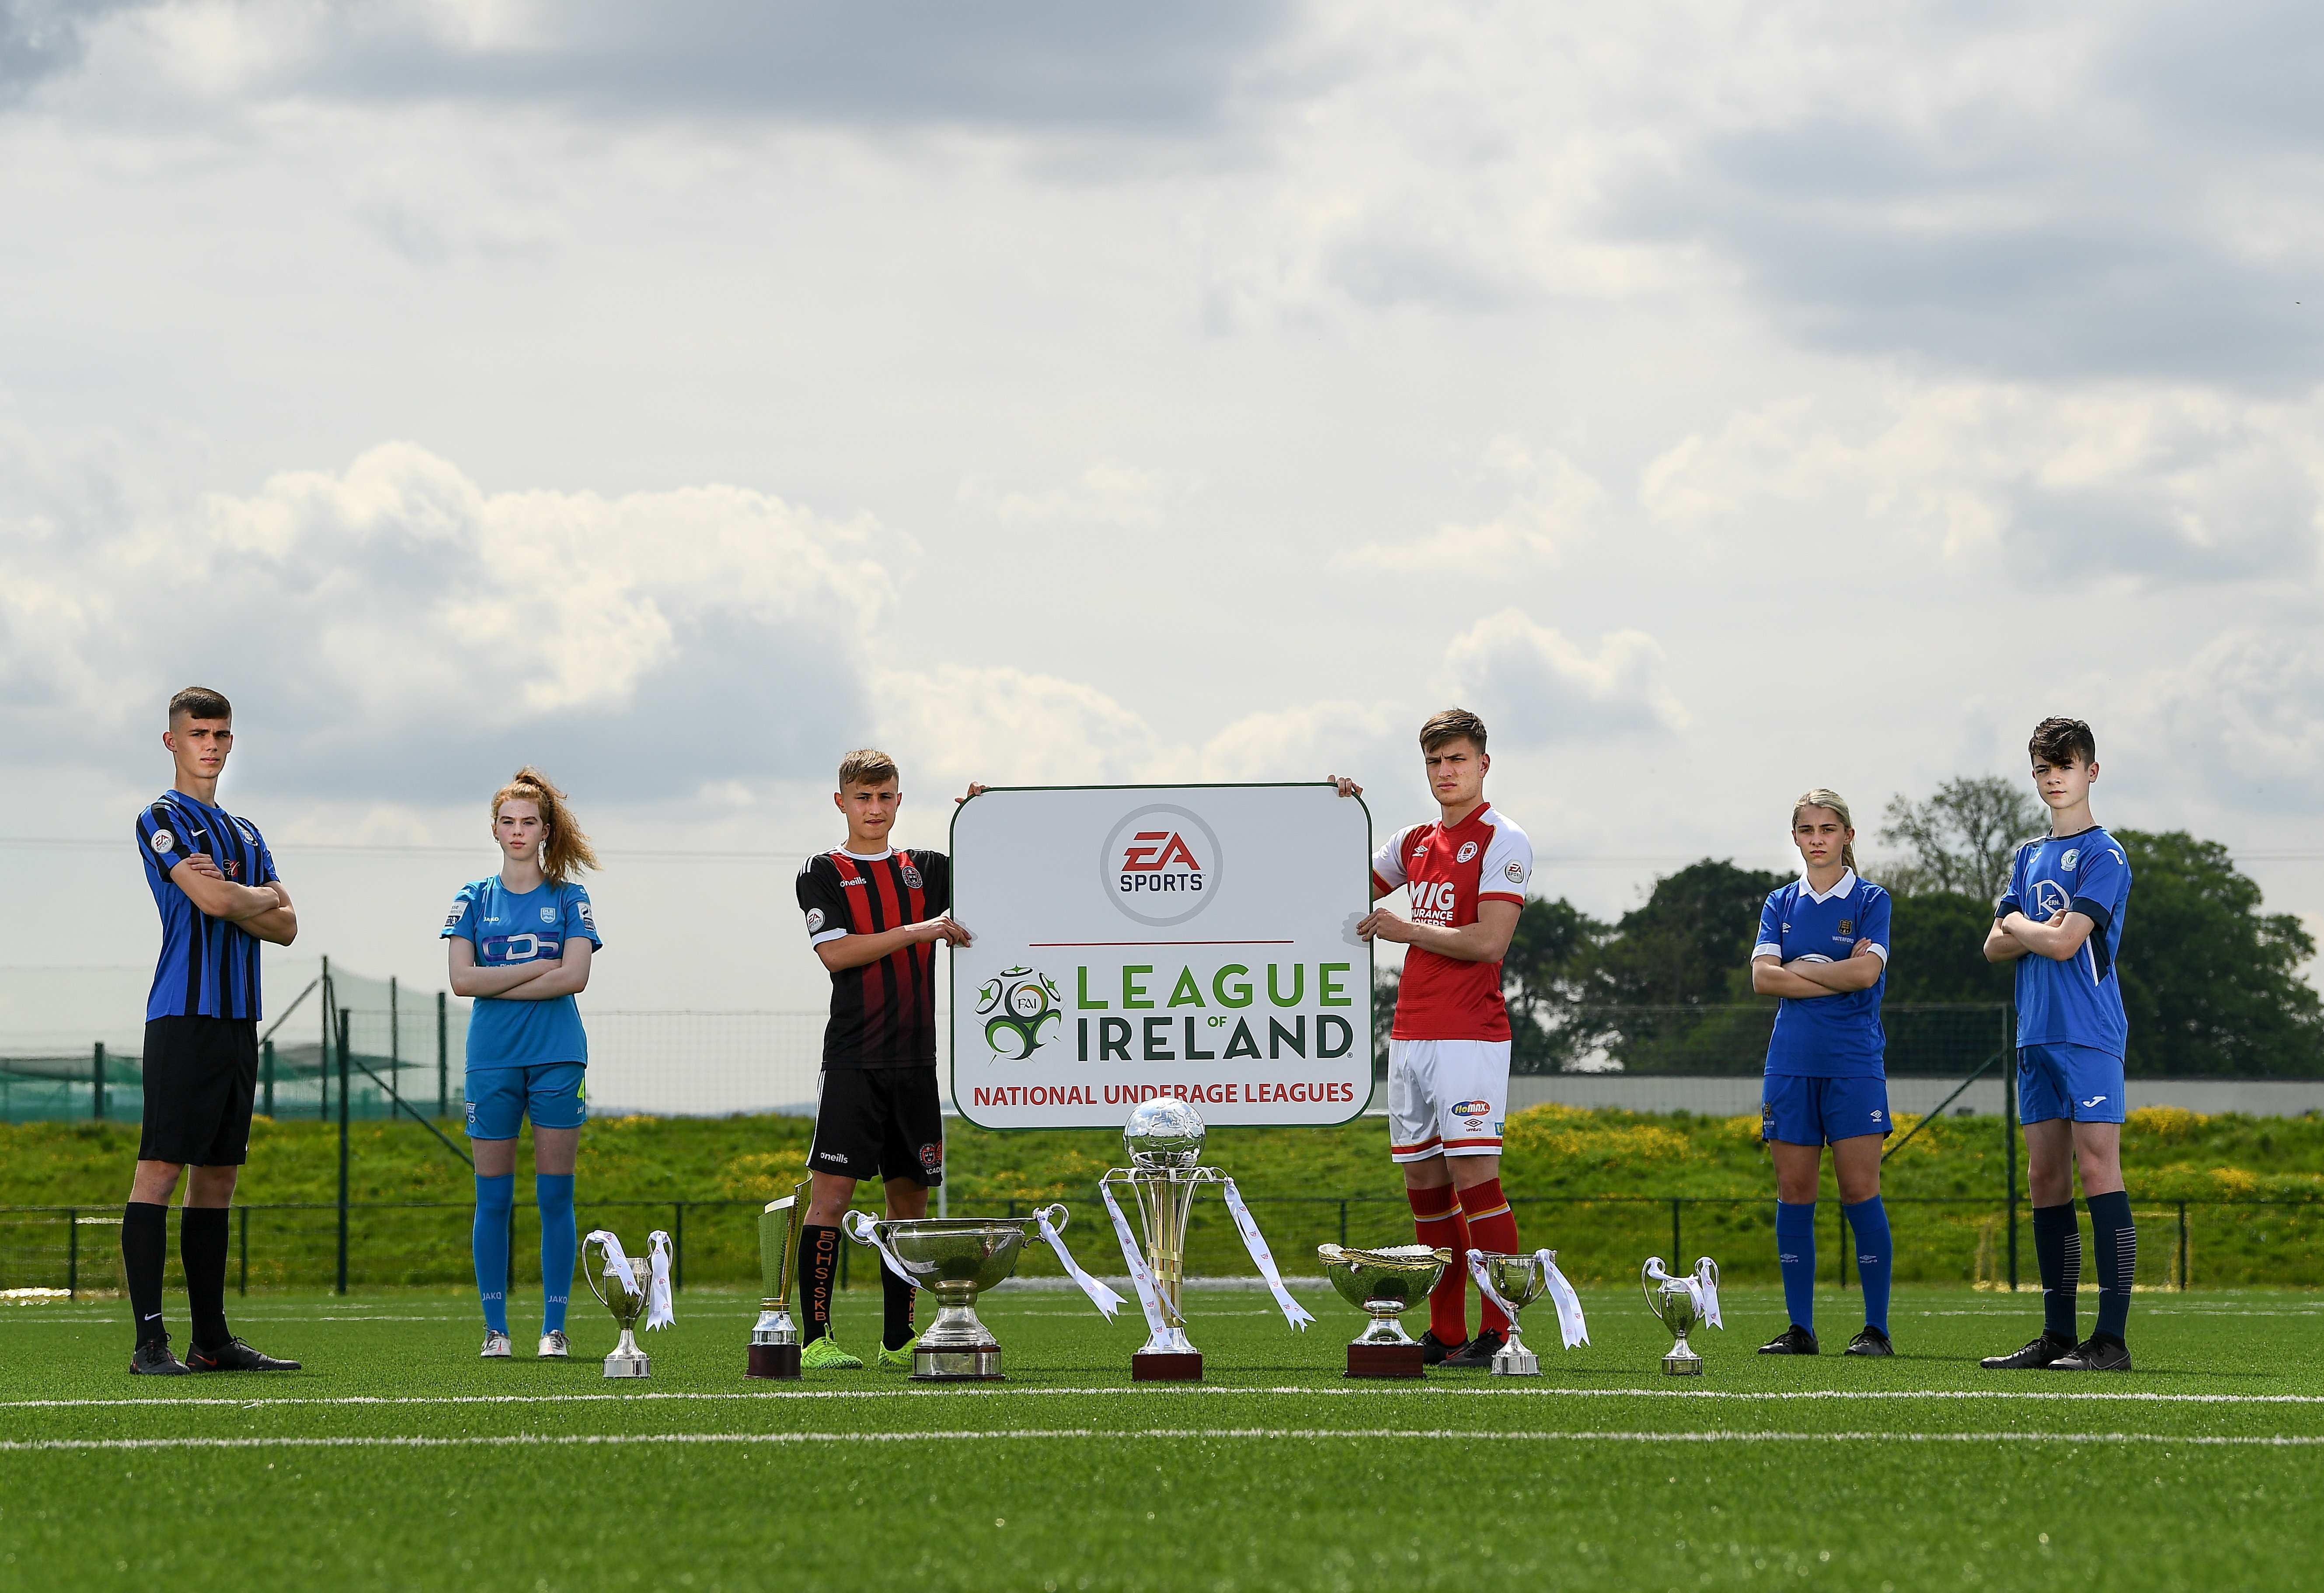 31 May 2021; Pictured, from left, Kian Hogan of Athlone Town, Chloe McCarthy of DLR Waves, Danny McGrath of Bohemians, Cian Kelly of St Patrick's Athletic, Niamh O'Keeffe of Waterford and Colum Doherty of Finn Harps at the EA Sports Underage League Launch at the FAI National Training Centre in Abbotstown, Dublin. Photo by Harry Murphy/Sportsfile *** NO REPRODUCTION FEE ***